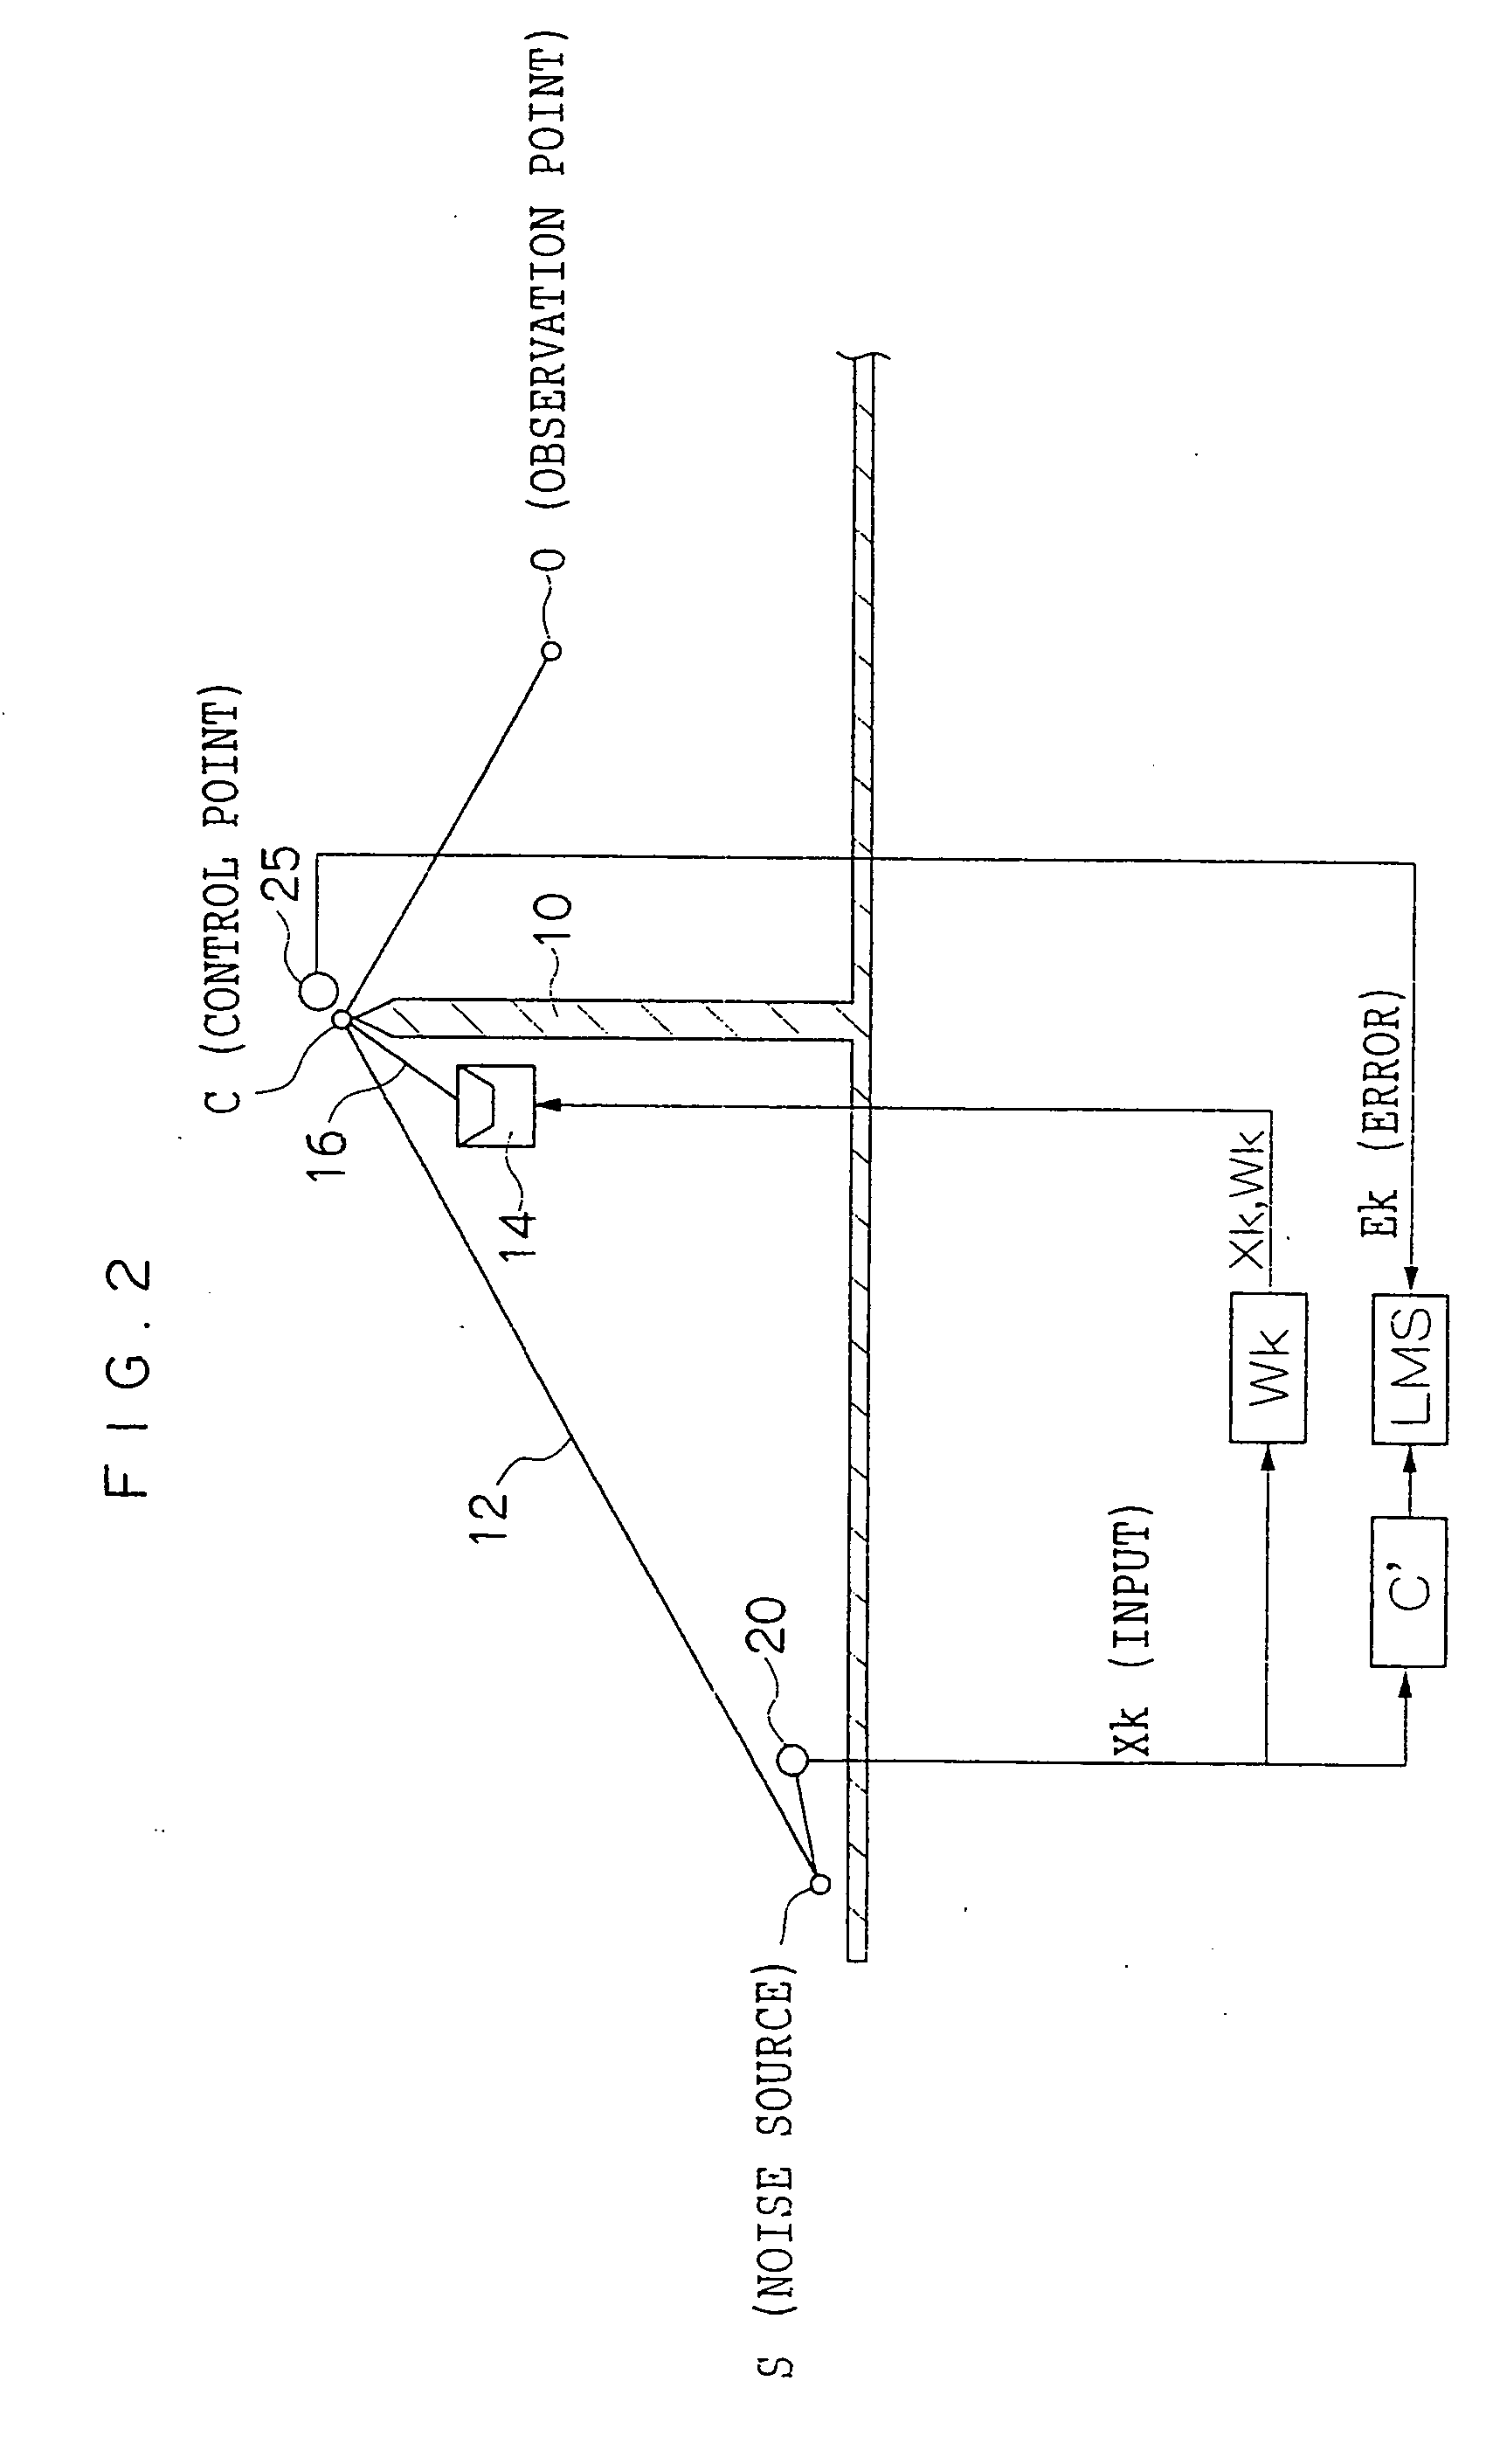 Noise reducing device